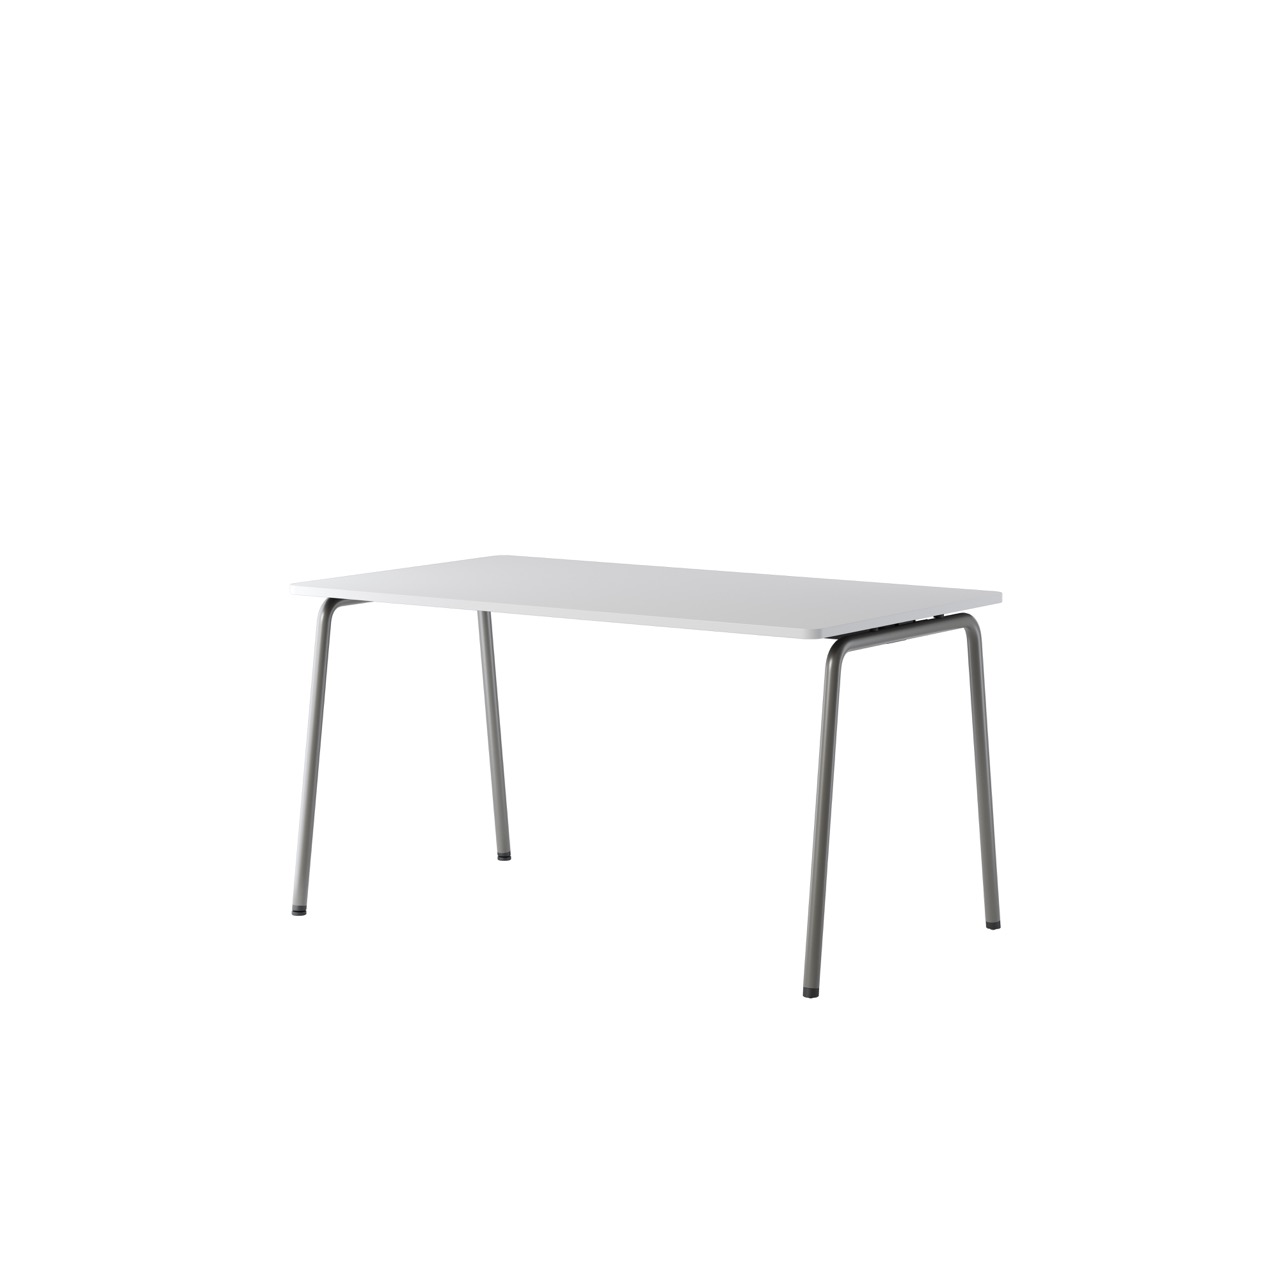 OCEE&FOUR - Tables - FourReal 74 - 140 x 80 - Angled - Packshot Image 4 Large